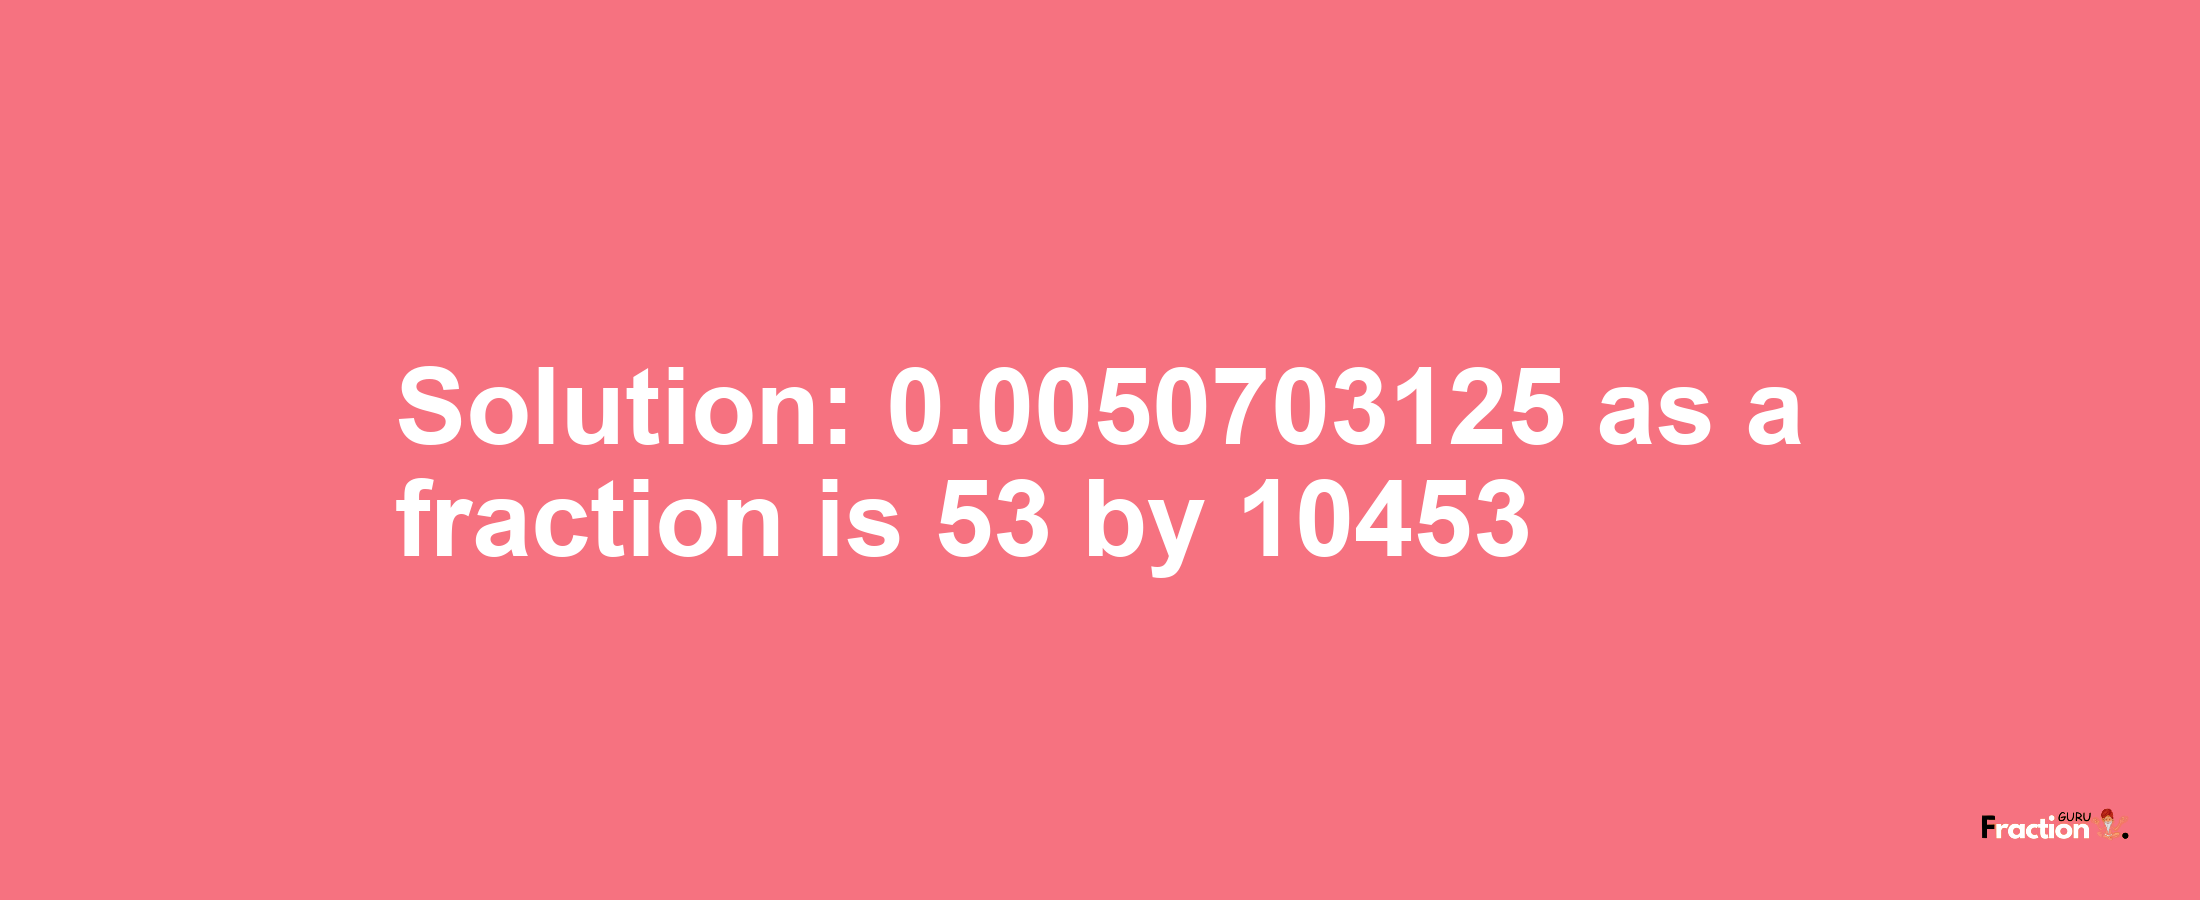 Solution:0.0050703125 as a fraction is 53/10453